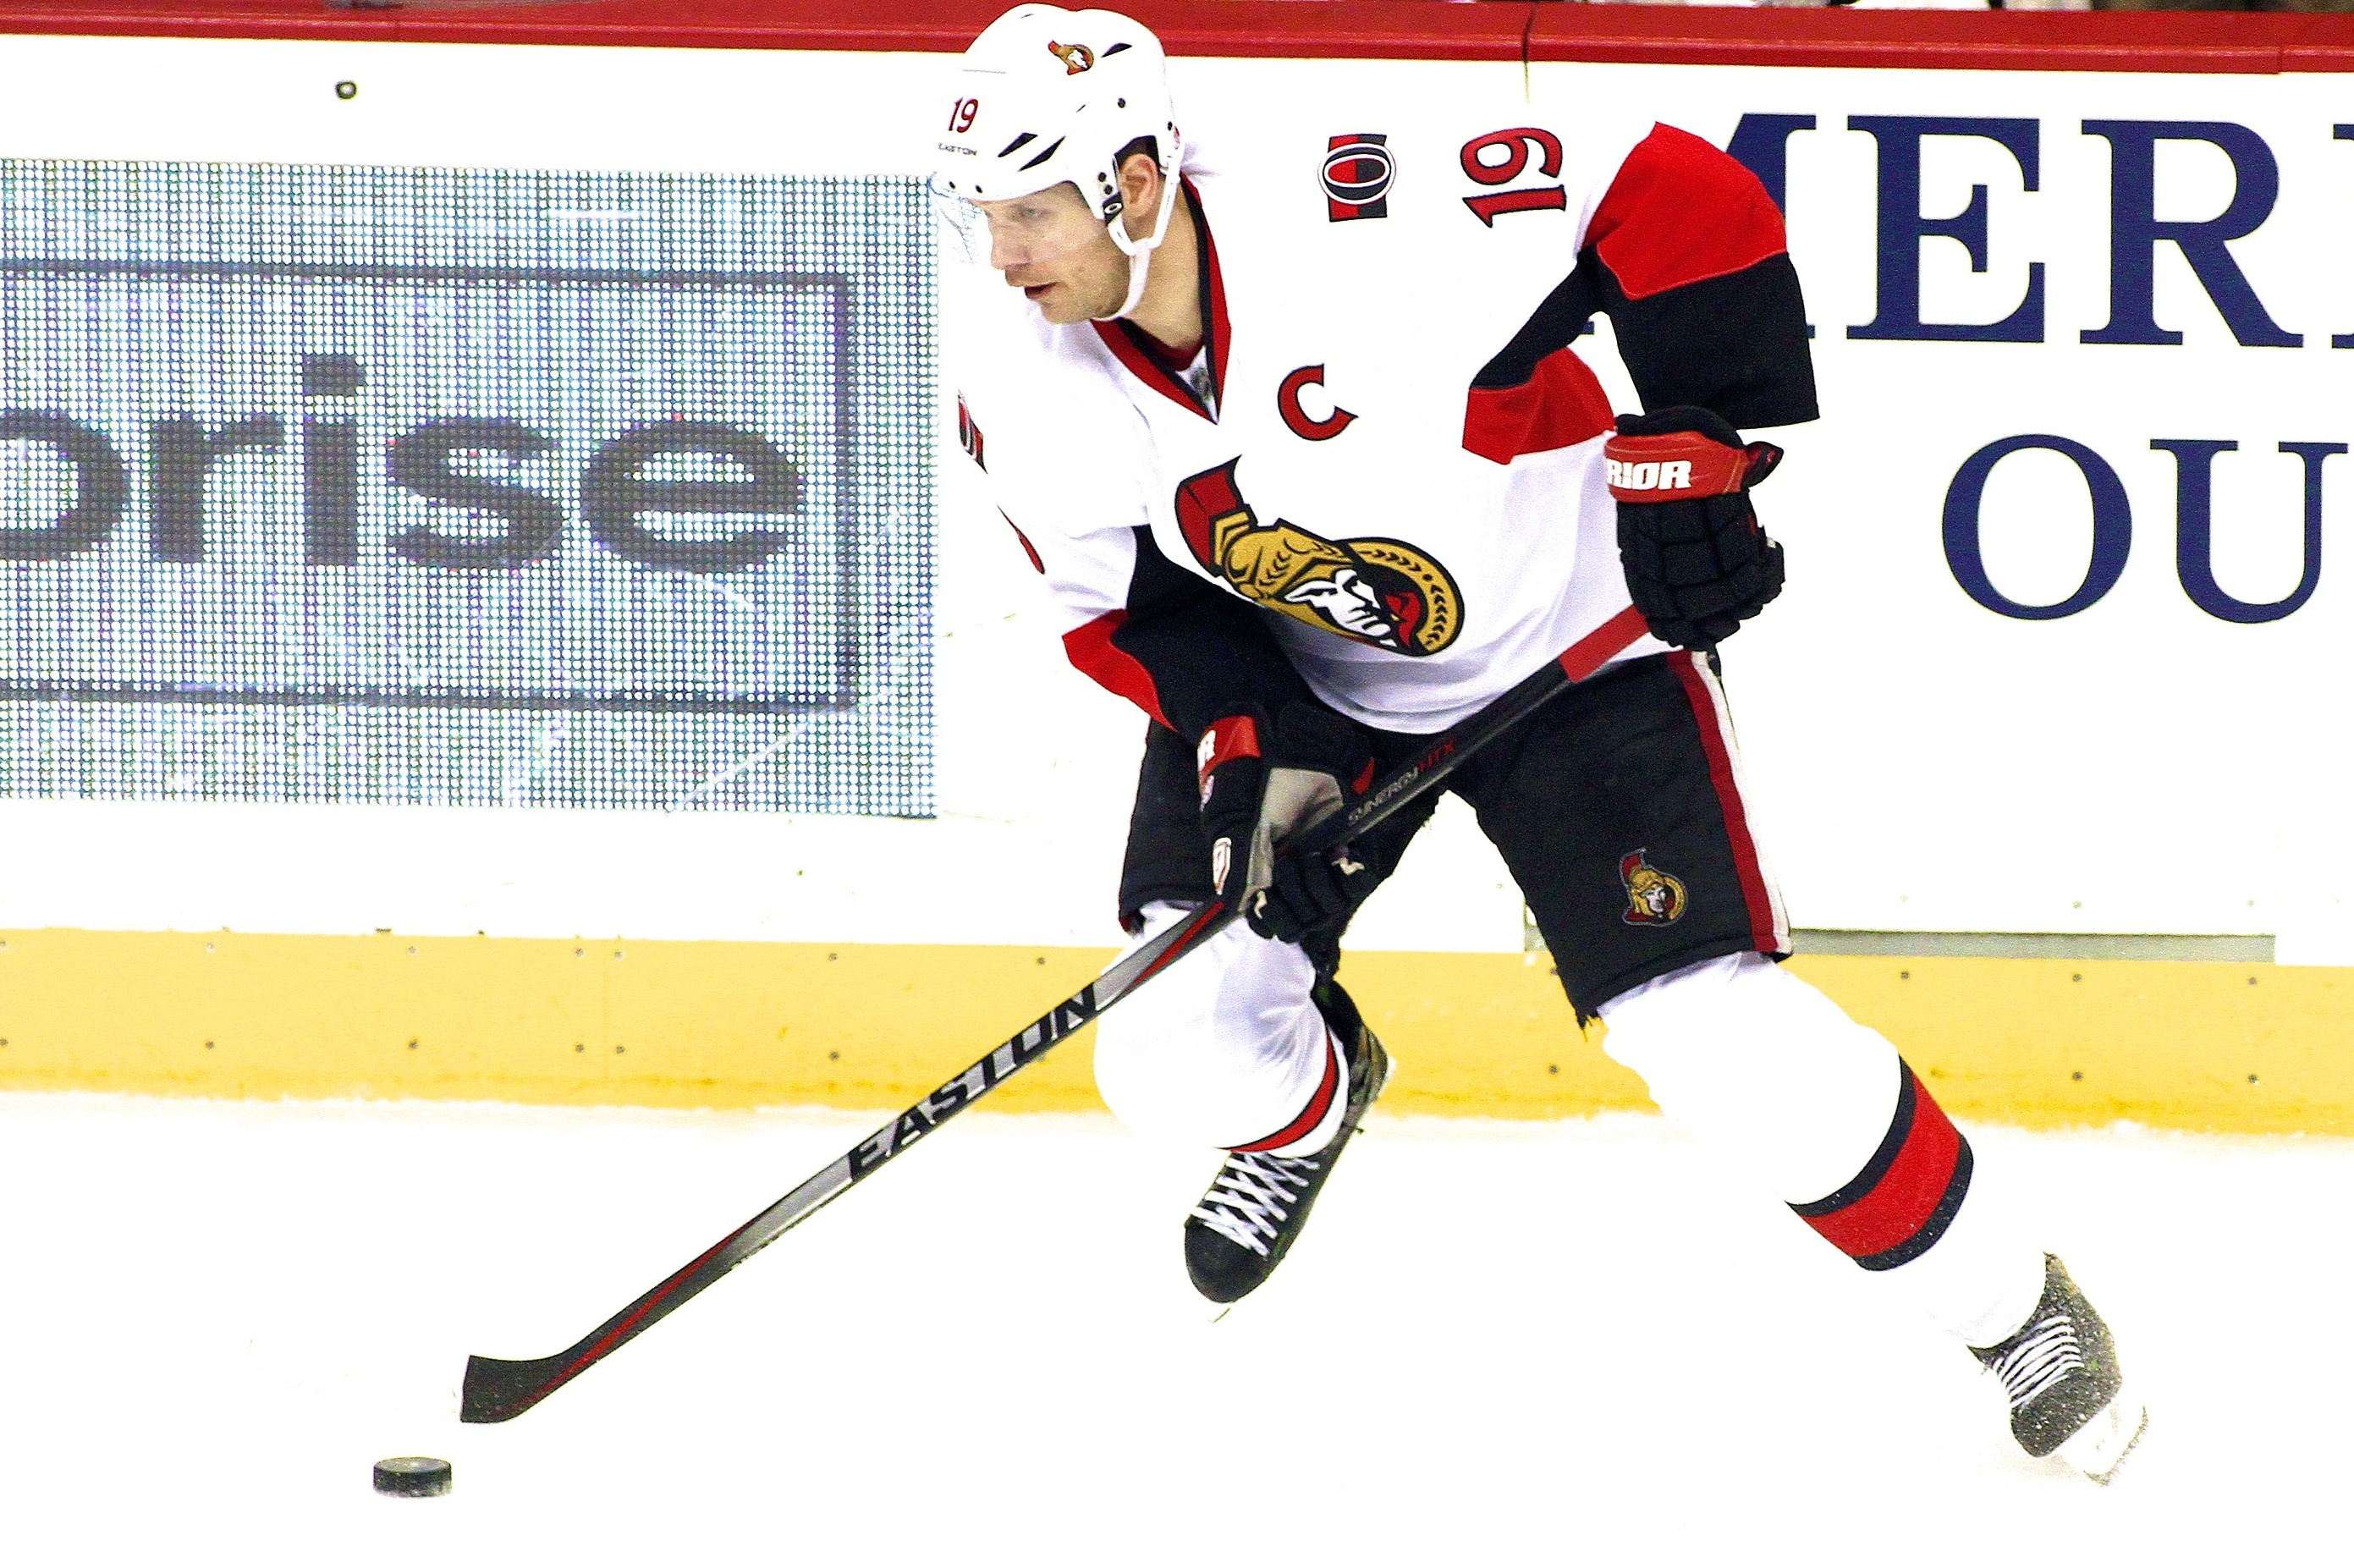 Jason Spezza has signed a one-year contract extension with the